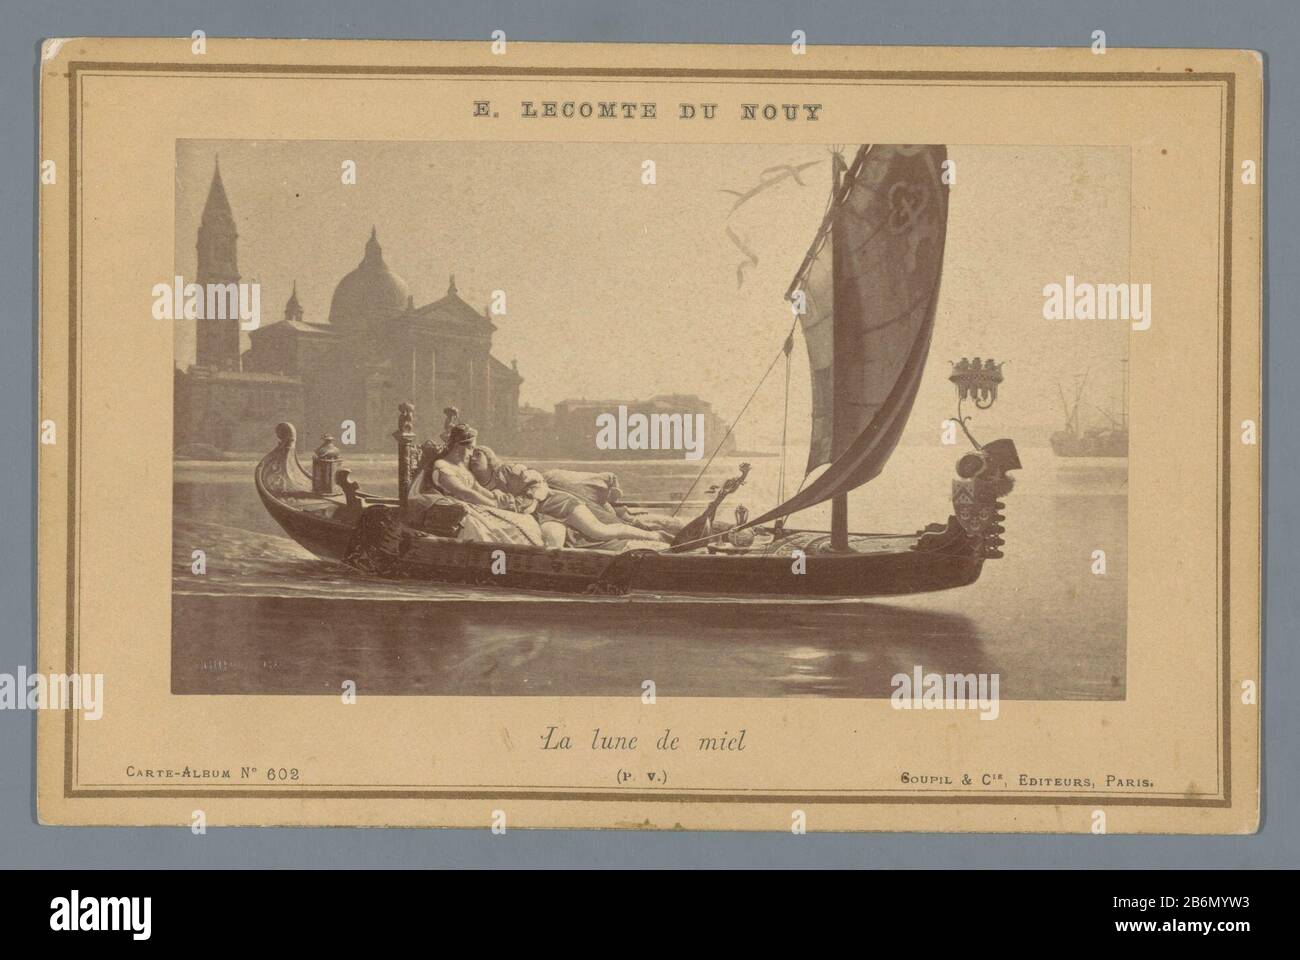 Photo reproduction of a painting of a boat with two lovers in Venice by Jean-Jules-Antoine Lecomte du NouÿLa lune de miel (title object) Property Type: Cabinet photo reproduction Item number: RP-F F18895 Inscriptions / Brands: number, recto, printed, 'Carte-Album No. 602' Manufacturer : Photographer: Goupil & Cie (listed property) to painting: Jean-Jules-Antoine Lecomte du Nouÿ (listed building) Publisher: Goupil & Cie (listed property) Place manufacture: Paris Date: ca. 1880 - ca. 1910 Material: photo paper, cardboard Technique: albumin pressure dimensions: picture: h 75 mm × W 130 mm Subject Stock Photo